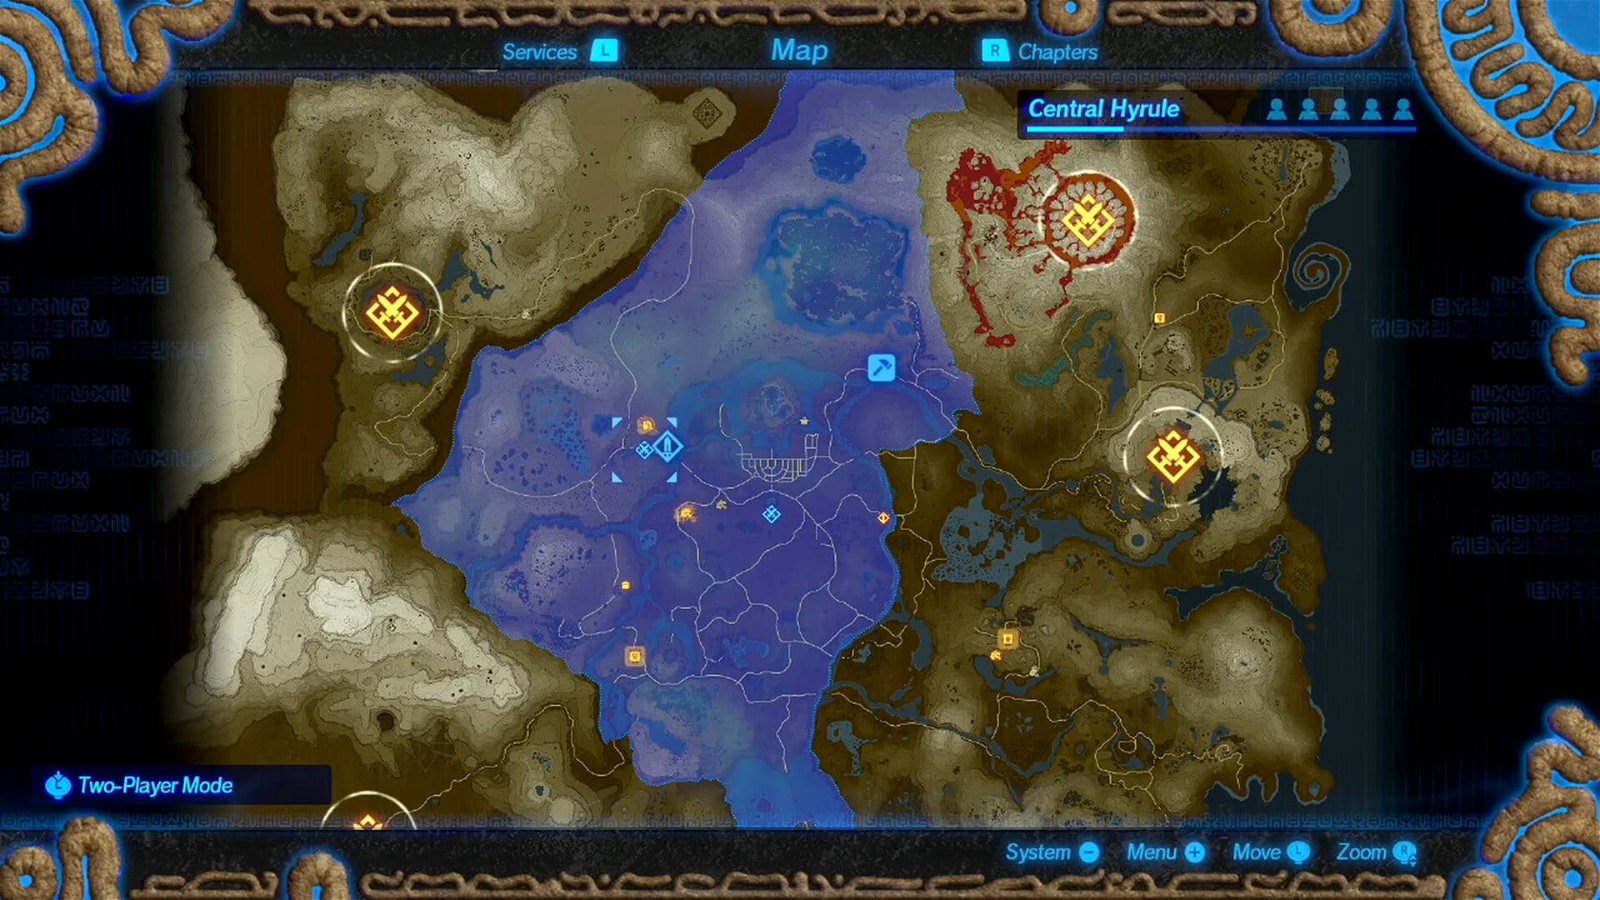 Hyrule Warriors Age of Calamity demo map